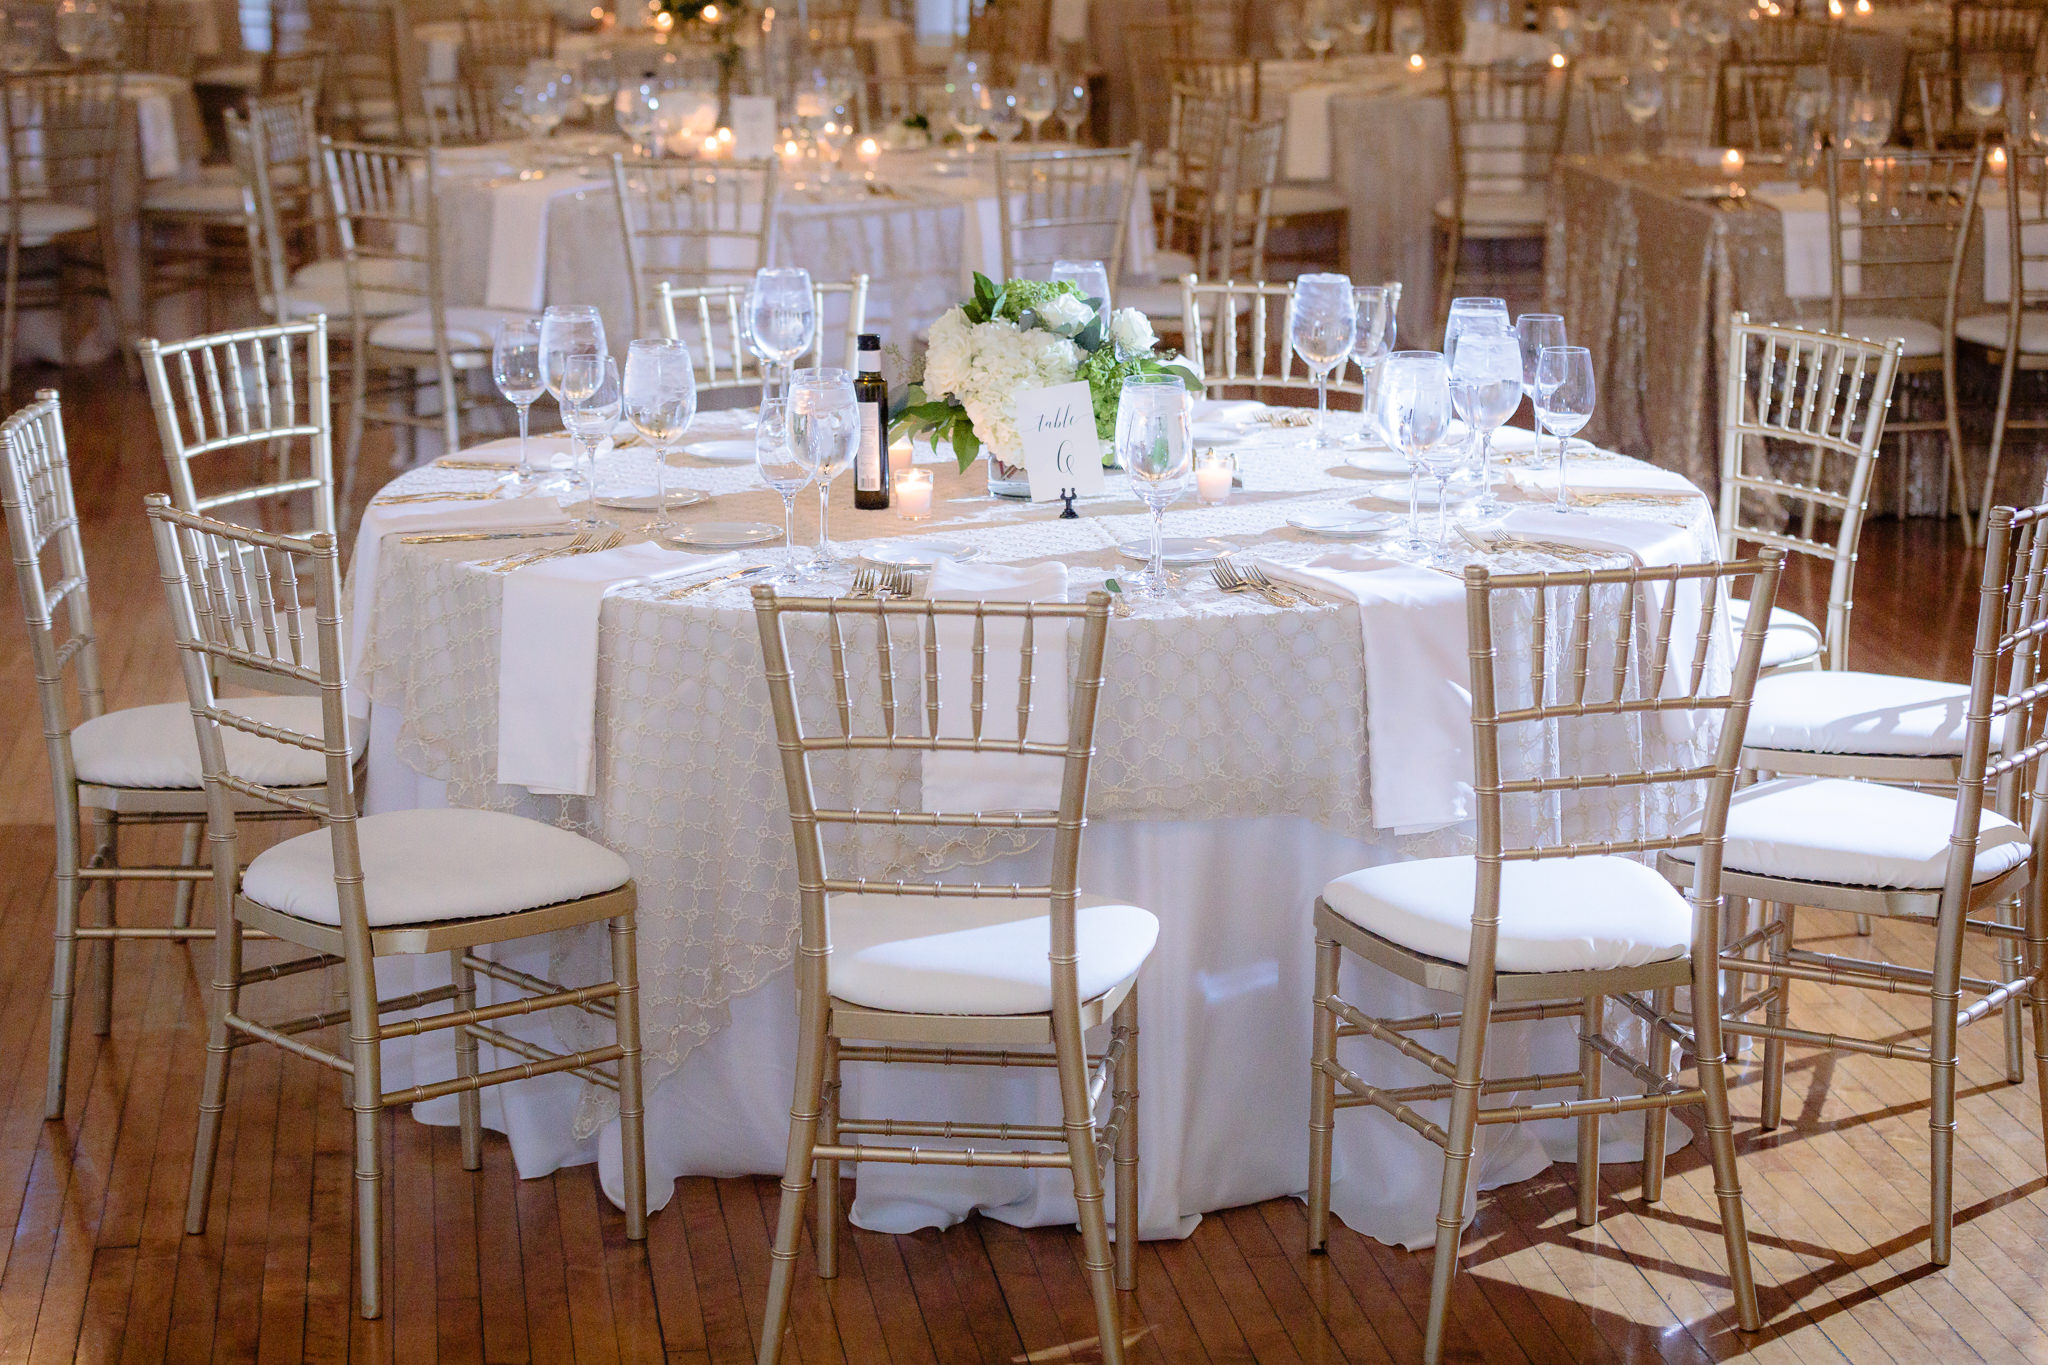 Classic white and gold table settings for a wedding reception at Soldiers & Sailors